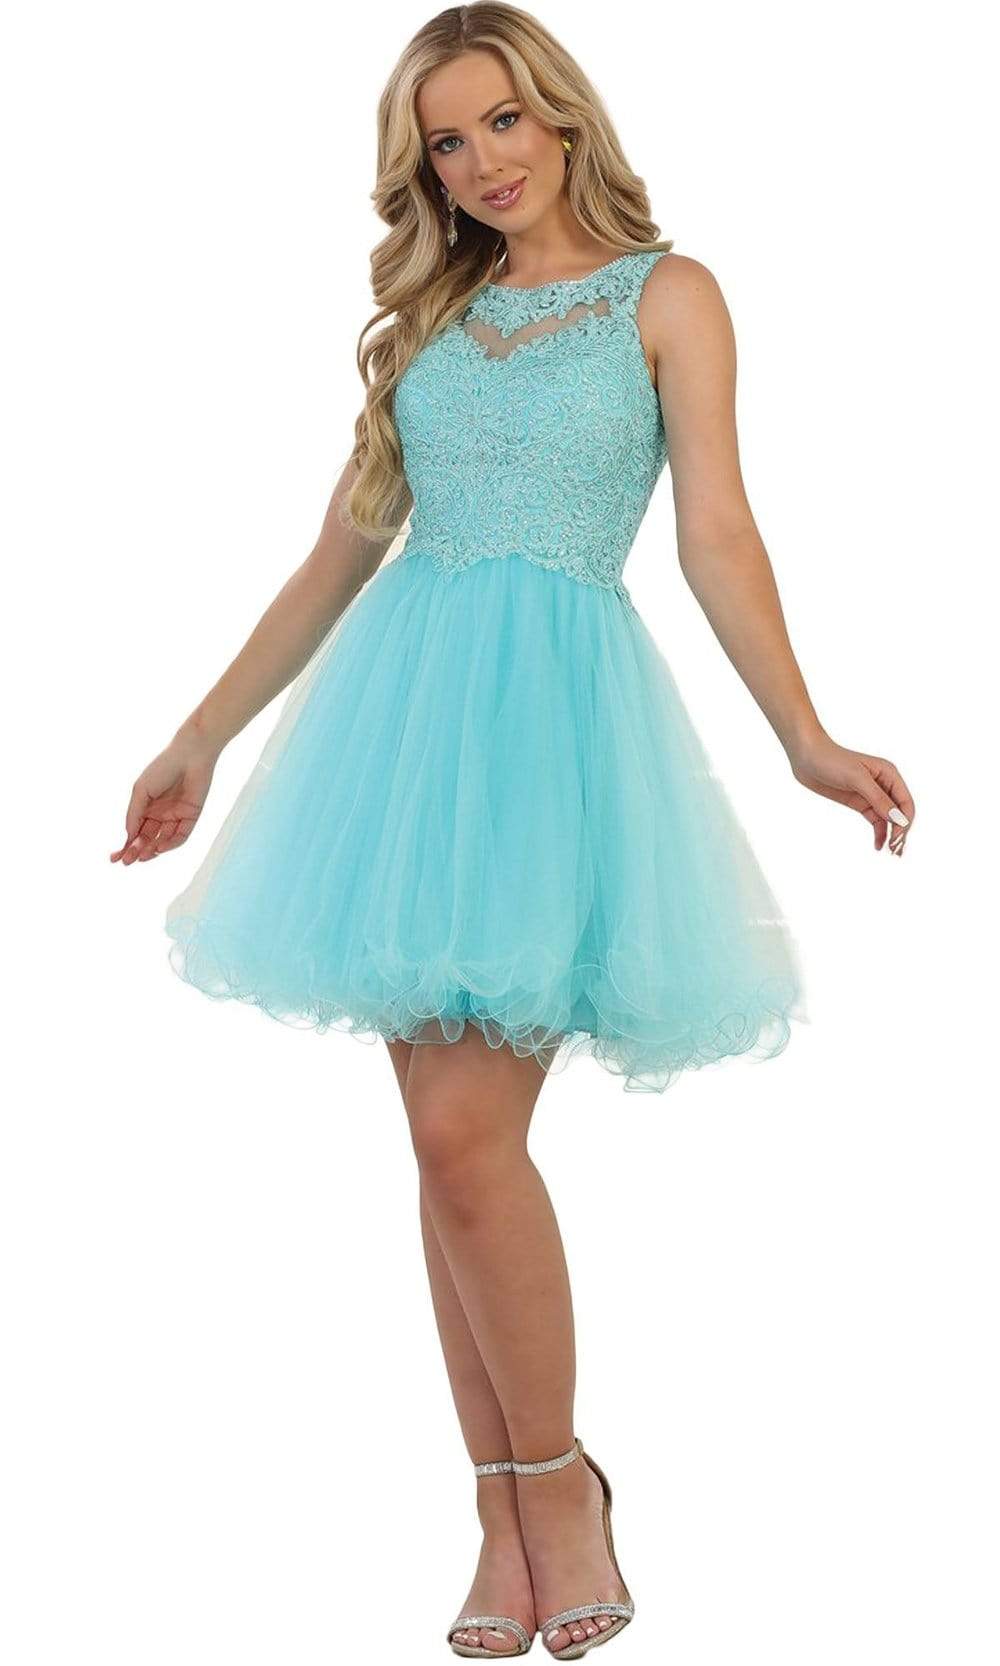 May Queen - Embellished Jewel A-line Homecoming Dress